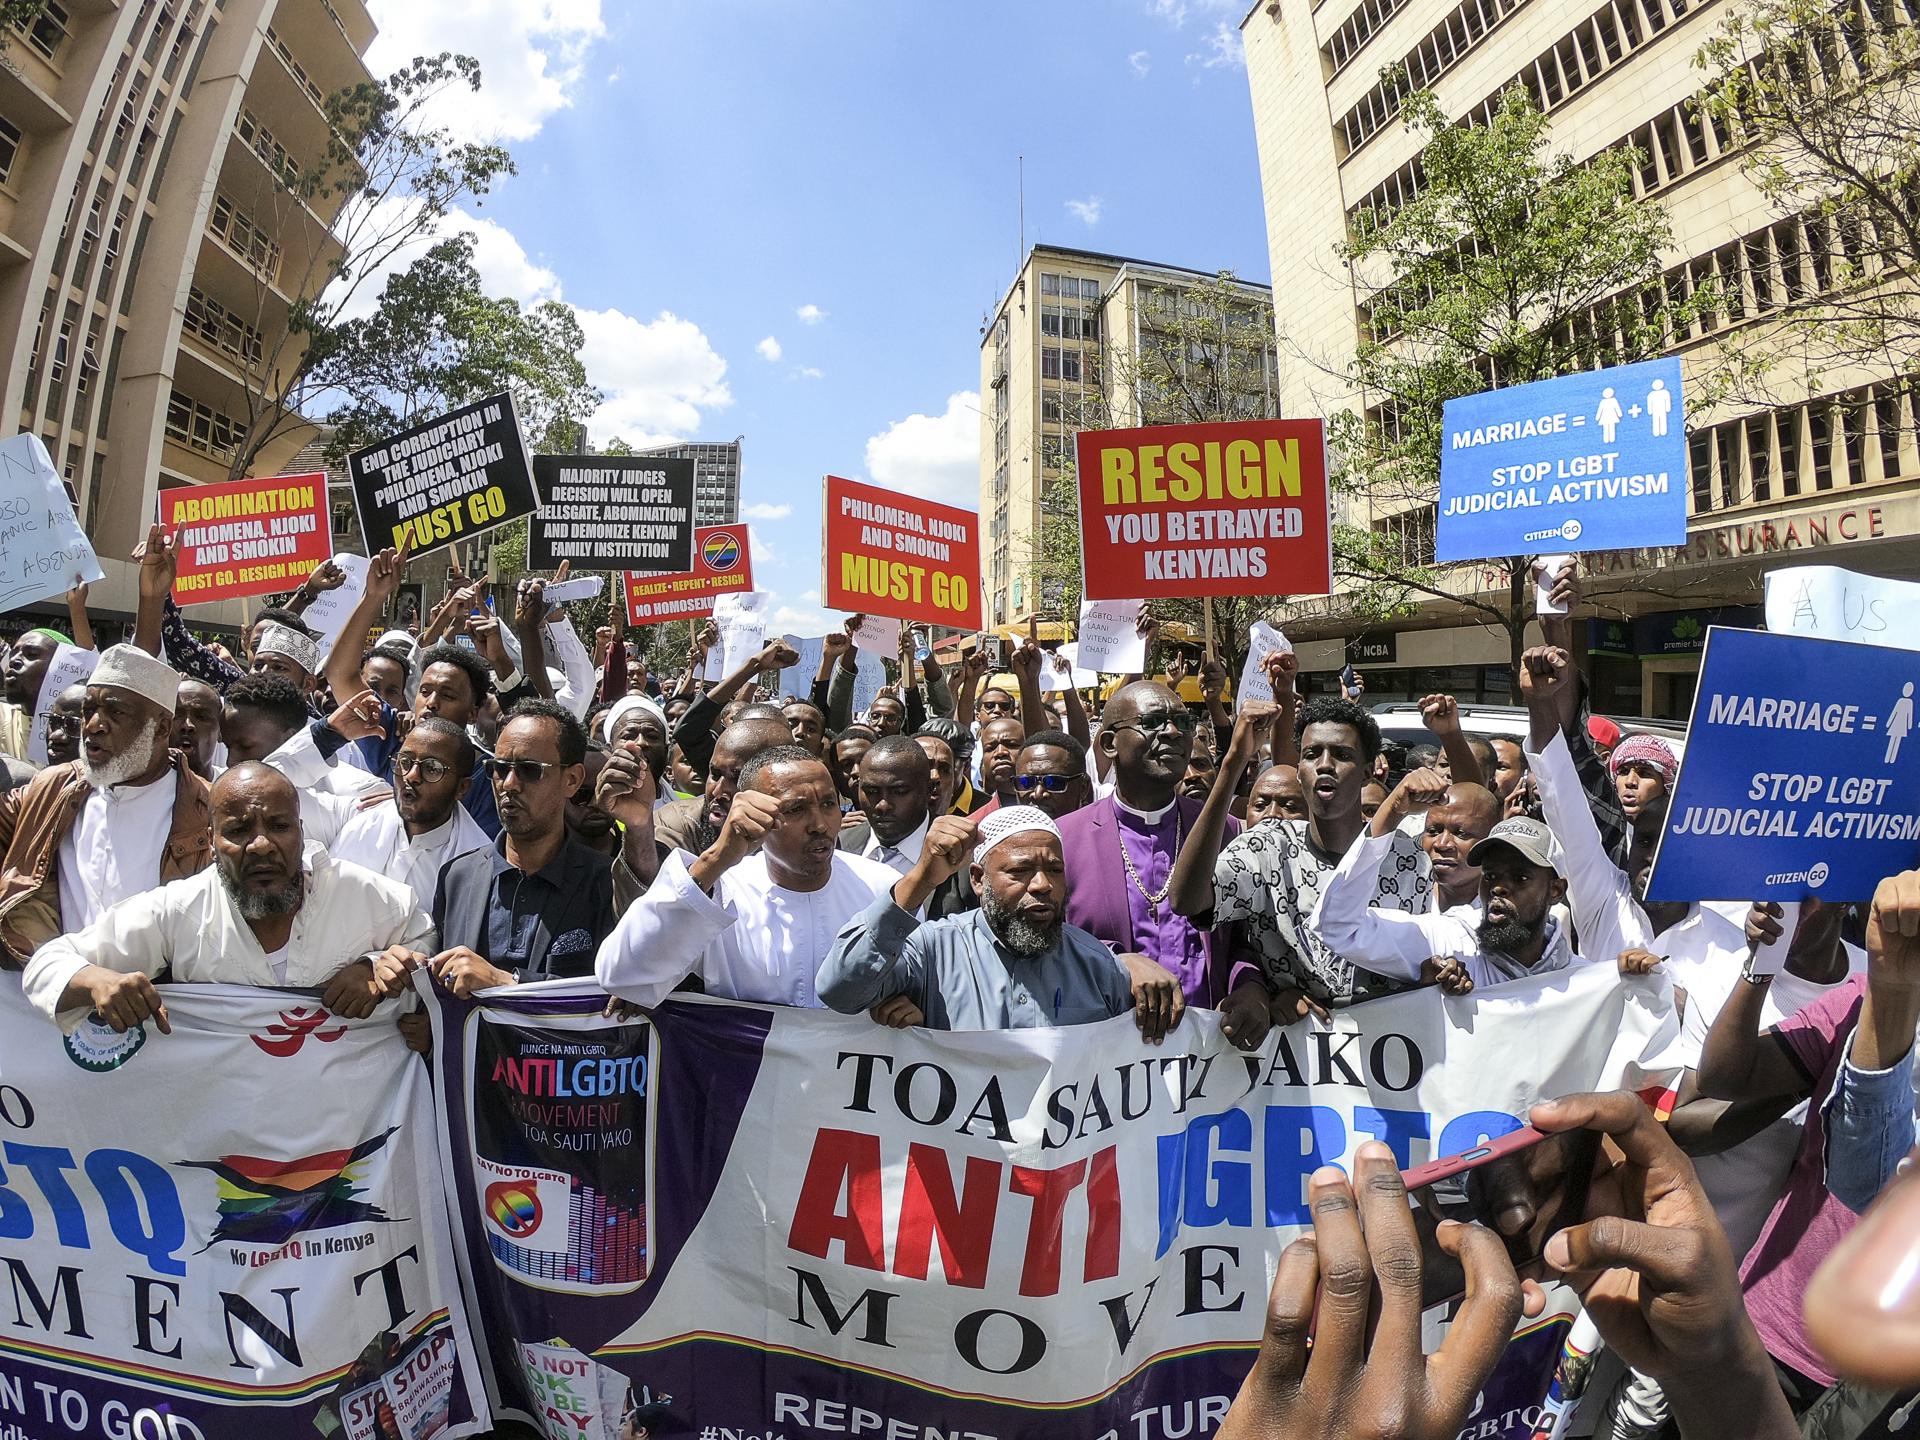 Supporters of the Anti-LGBTQ movement formed by members of different religious groups, hold placards and banners as they shout anti-LGBTQ slogans during a protest in the streets of Nairobi, Kenya, 06 October 2023. EFE/EPA/Daniel Irungu